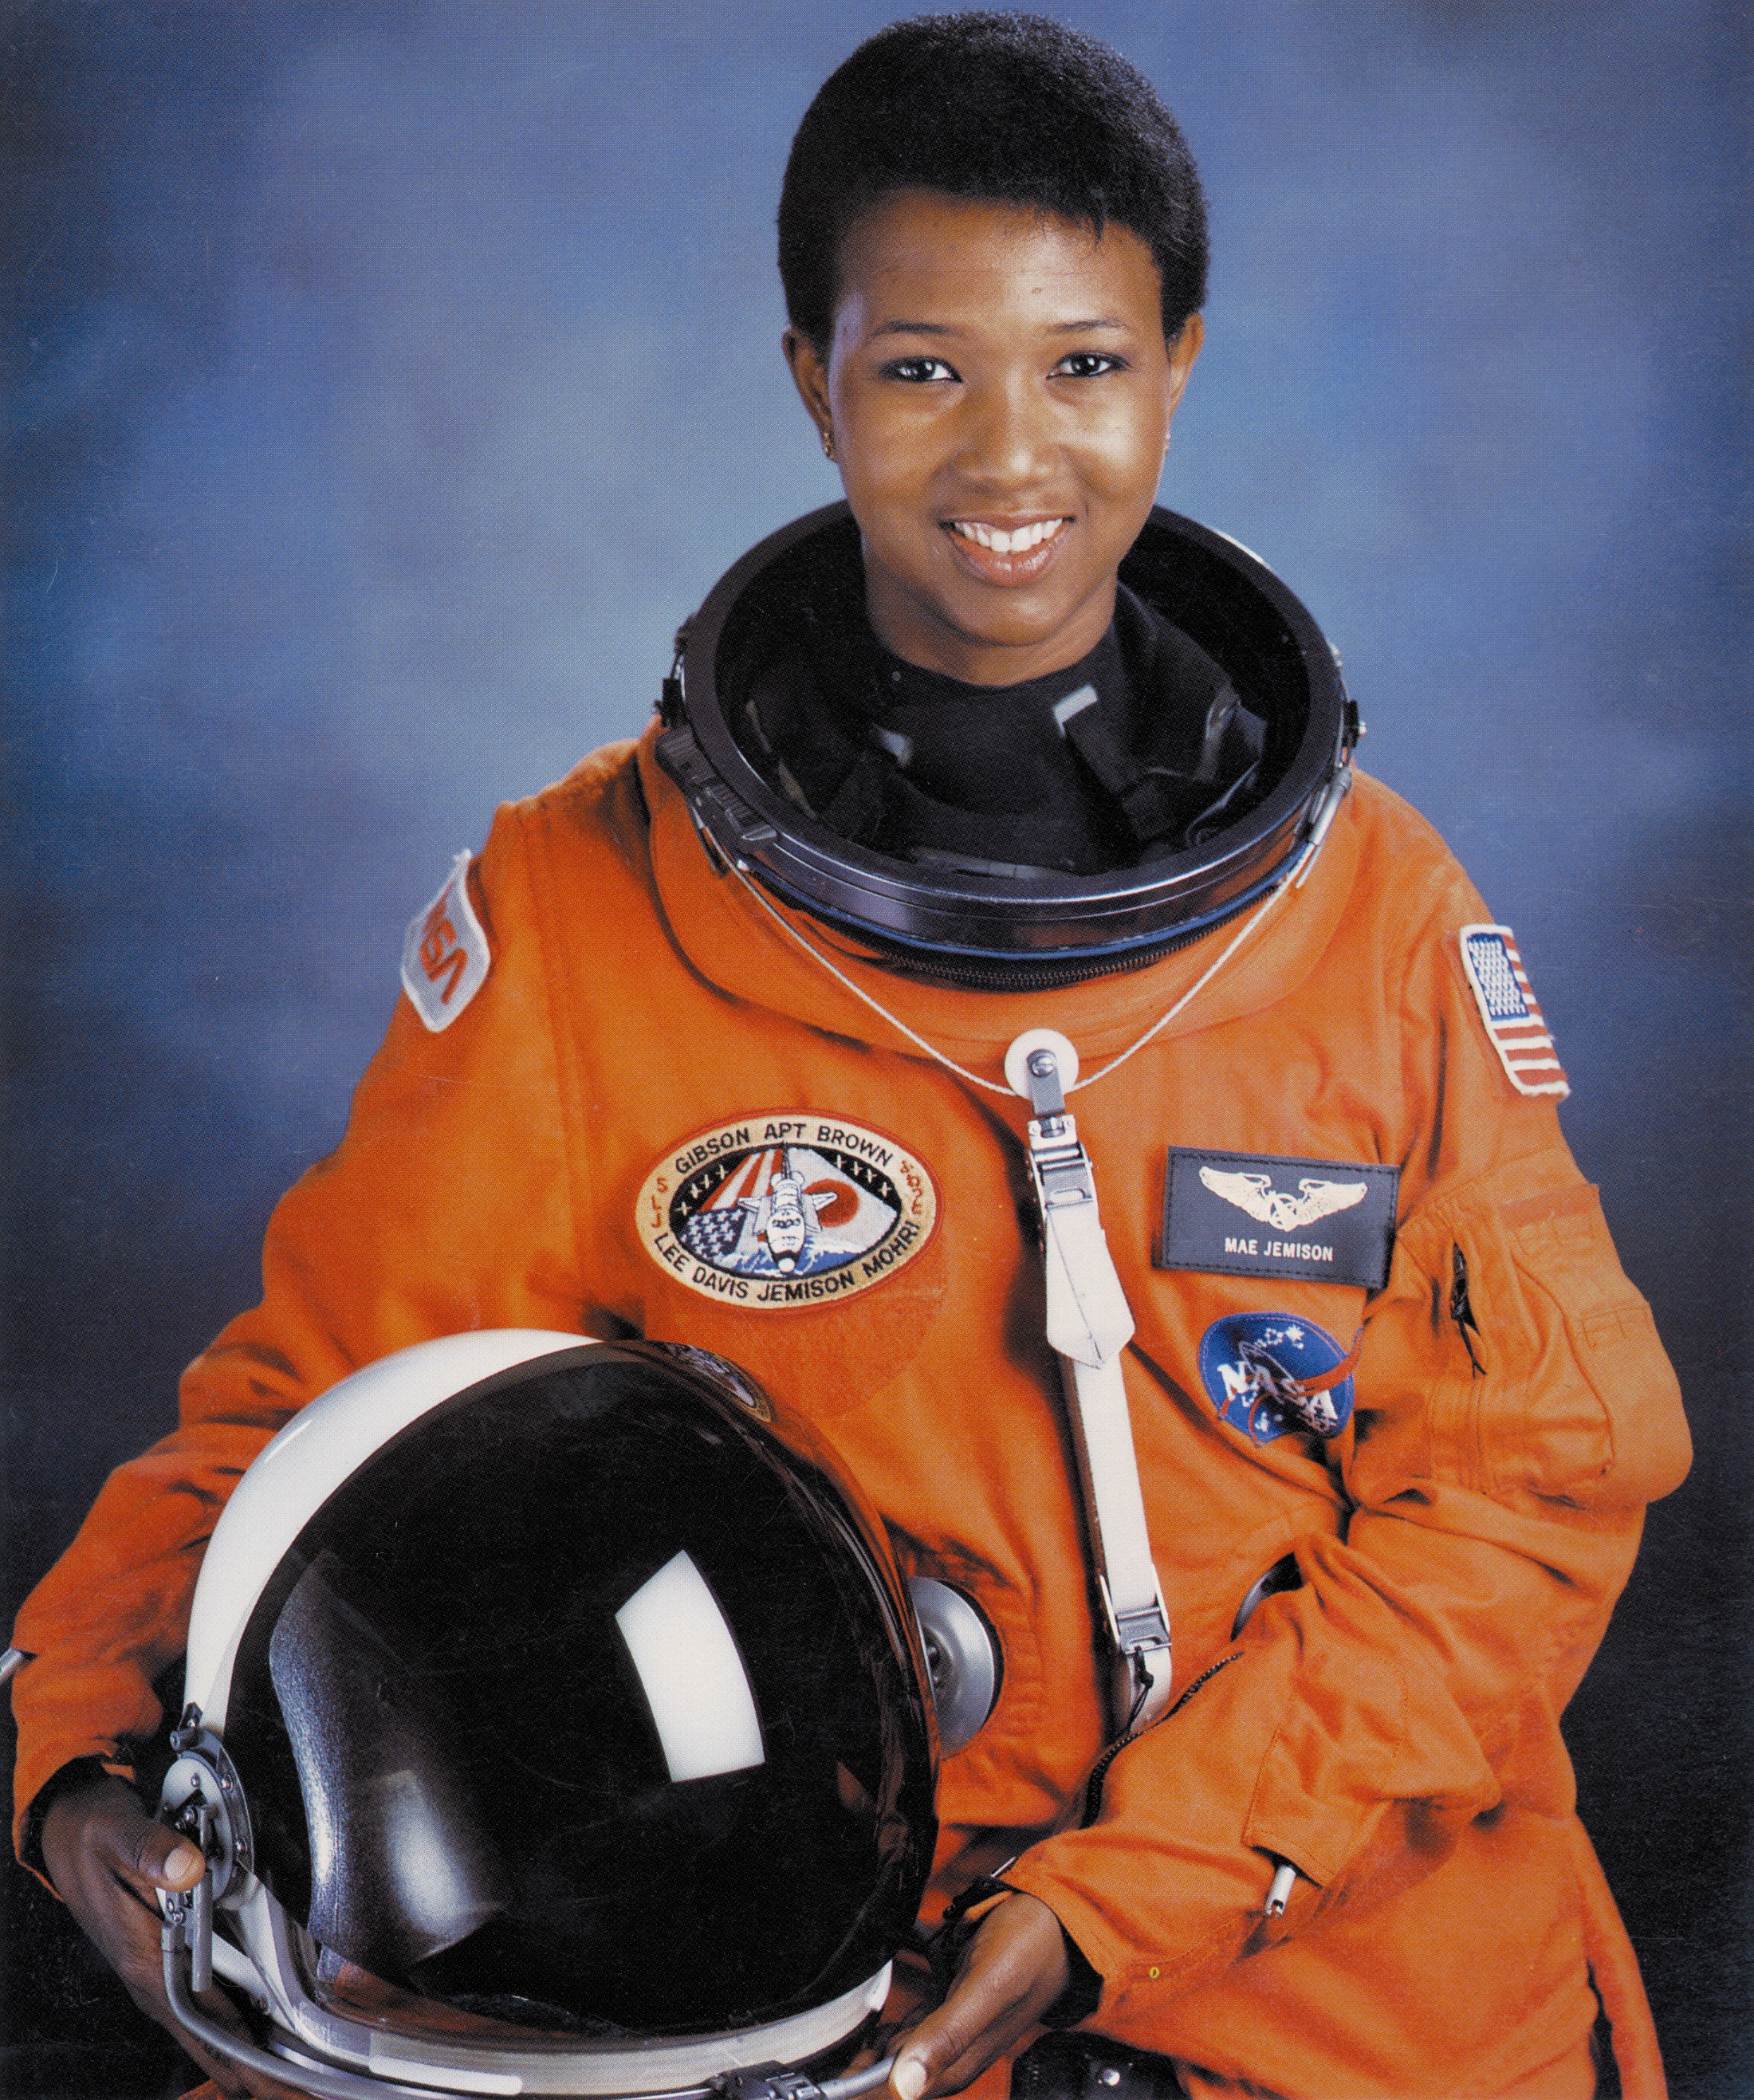 Dr._Mae_C._Jemison,_First_African-American_Woman_in_Space_-_GPN-2004-00020.jpg